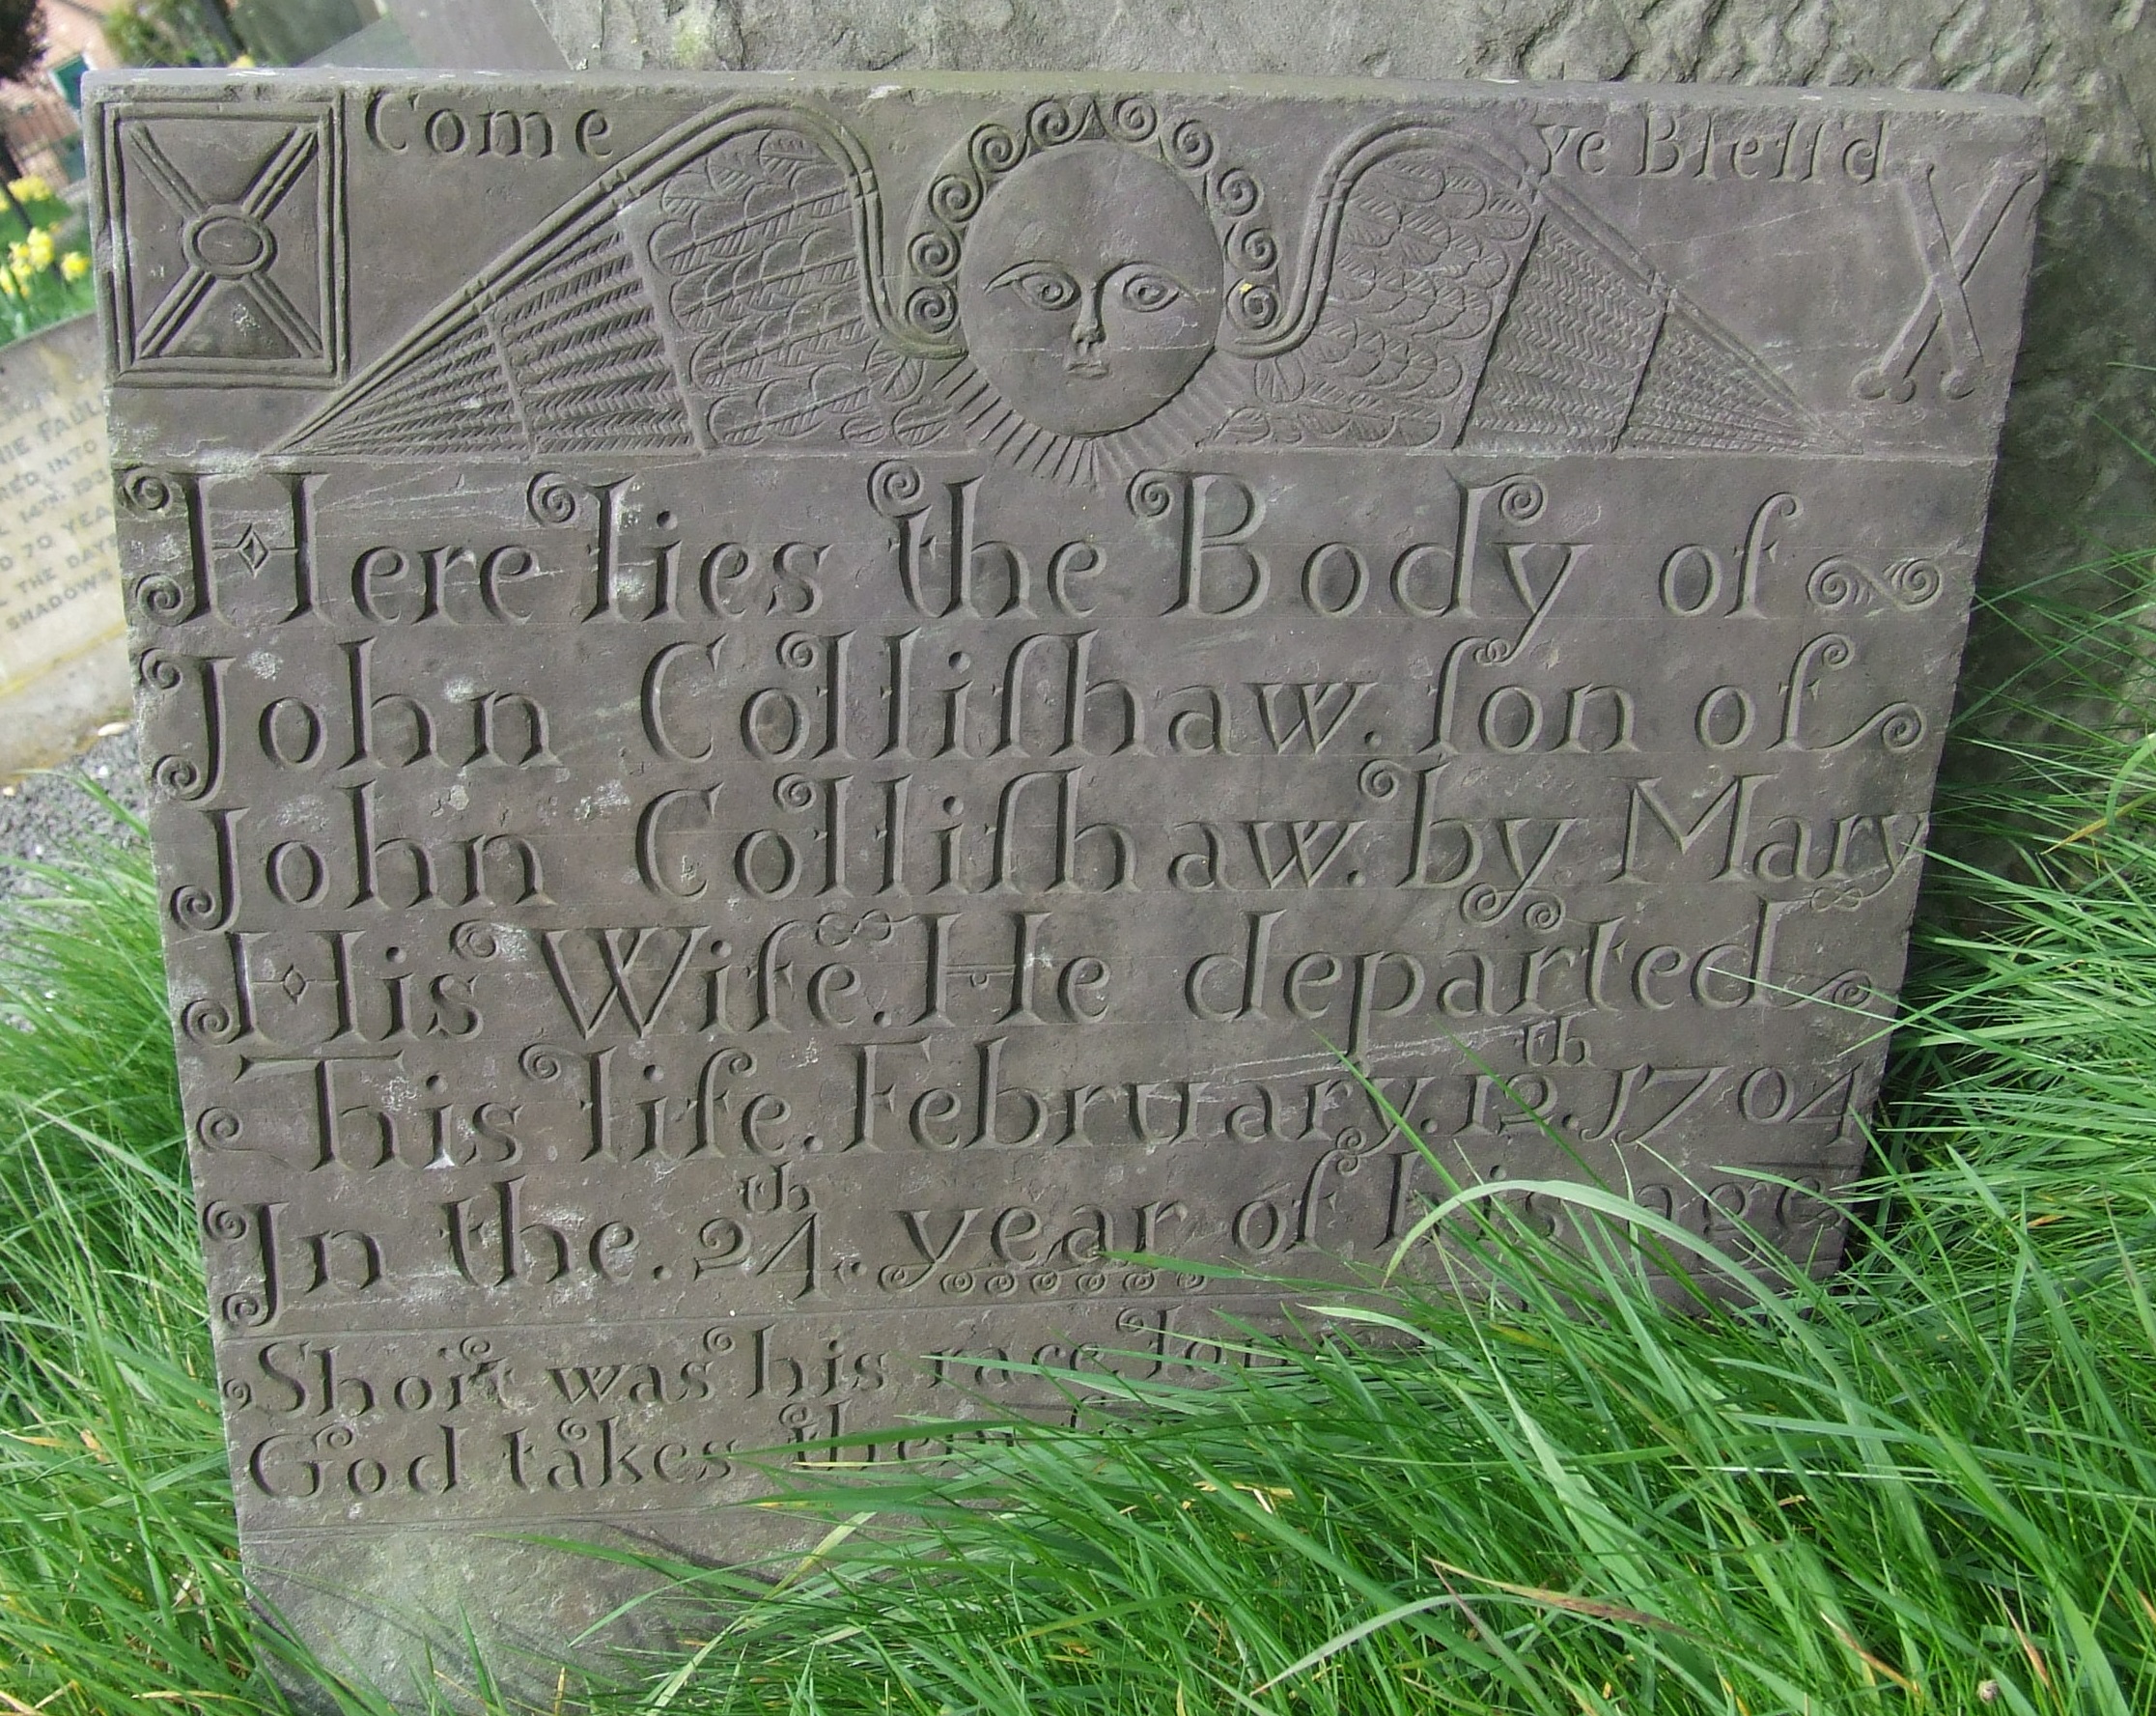 A headstone with a cherub motif and other mortality symbols